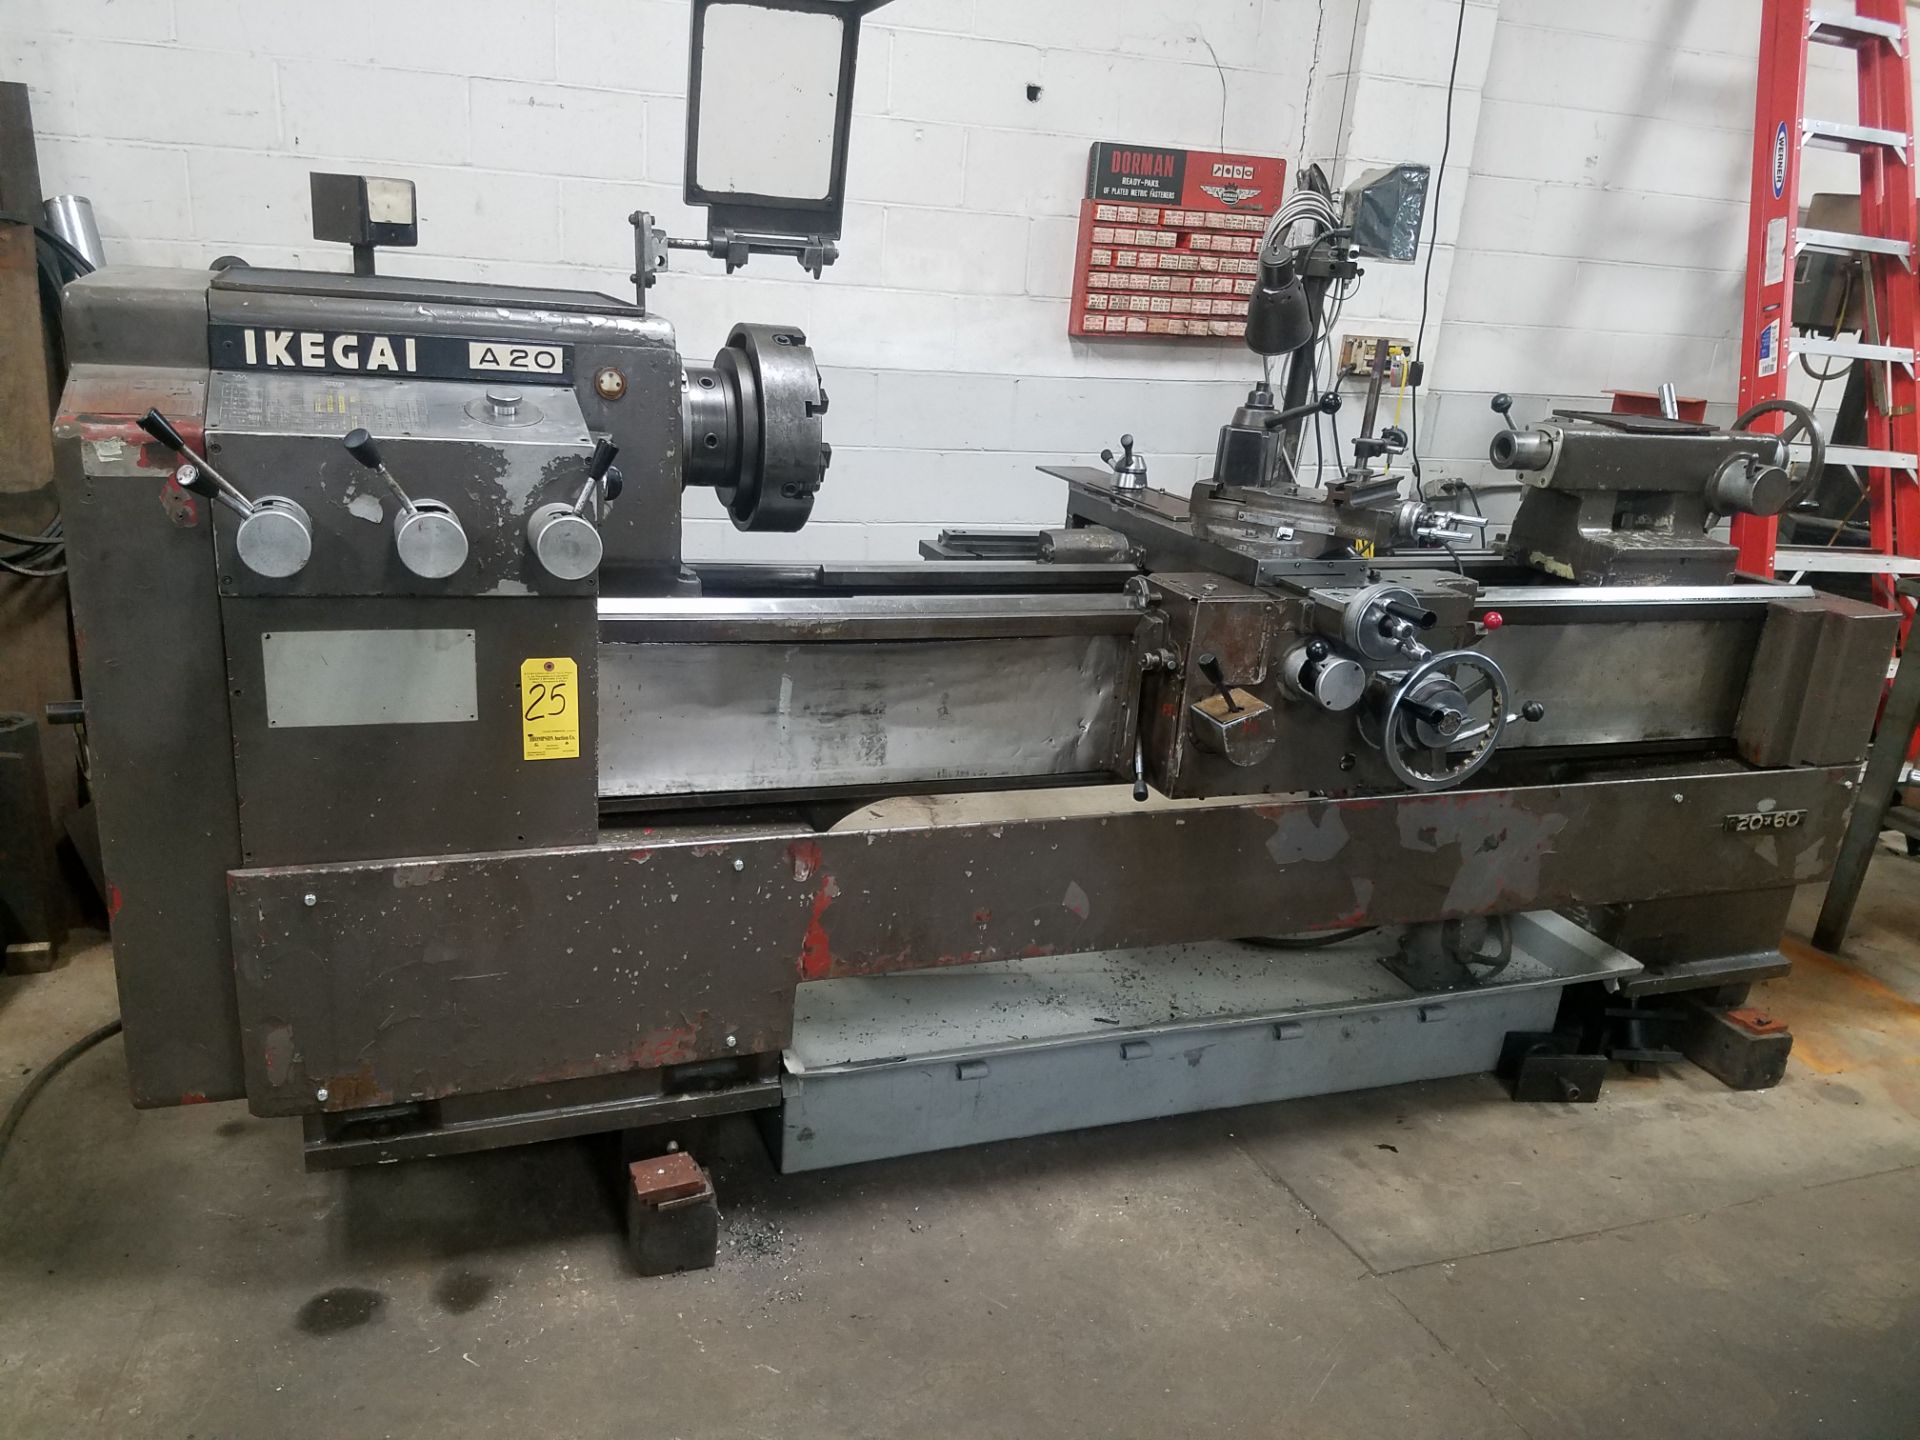 Ikegai Model A20 Engine Lathe, 20" X 60" Capacity, Taper Attachment, 12" 4-Jaw Chuck, Quick Change - Image 2 of 7